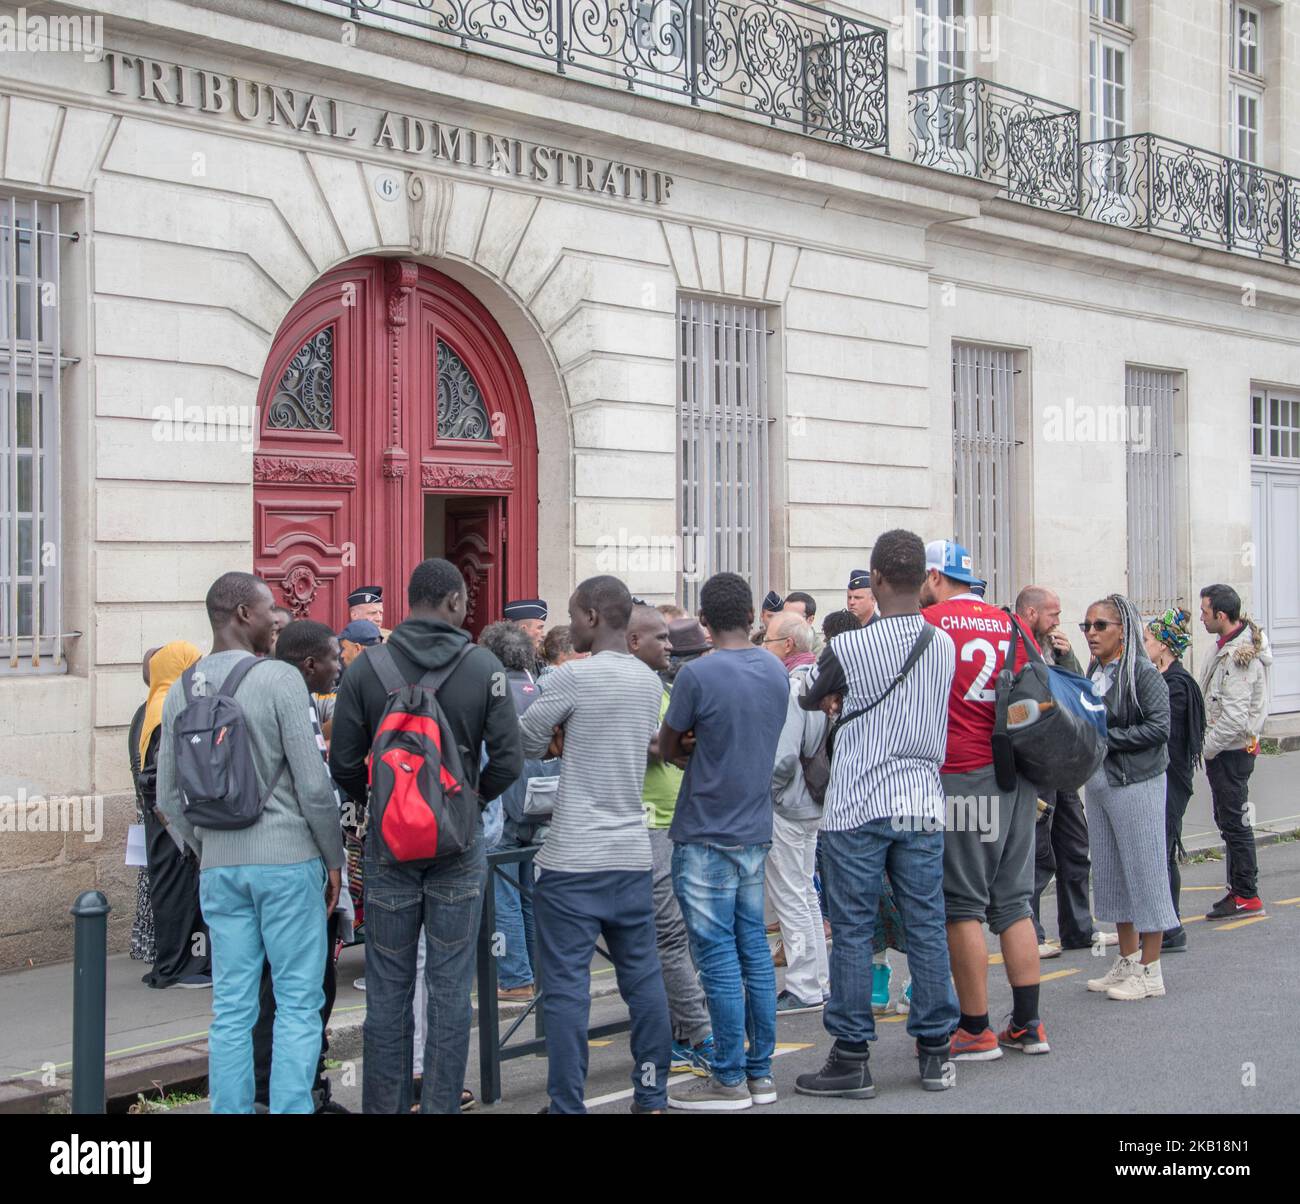 On Wednesday, September 19, 2018, the Administrative Court of Nantes examined two motions concerning the camp of migrant square Daviais. The first was formulated by four associations of support to migrants (Cimade, League of Human Rights, Movement against racism and friendship between peoples, support association to the group of foreign children) to obtain accommodation refugees and an improvement of the sanitary conditions under the 'respect for human dignity', the second emanating from the mayor of Nantes to finally request the evacuation of the 560 migrants settled in the square since June. Stock Photo